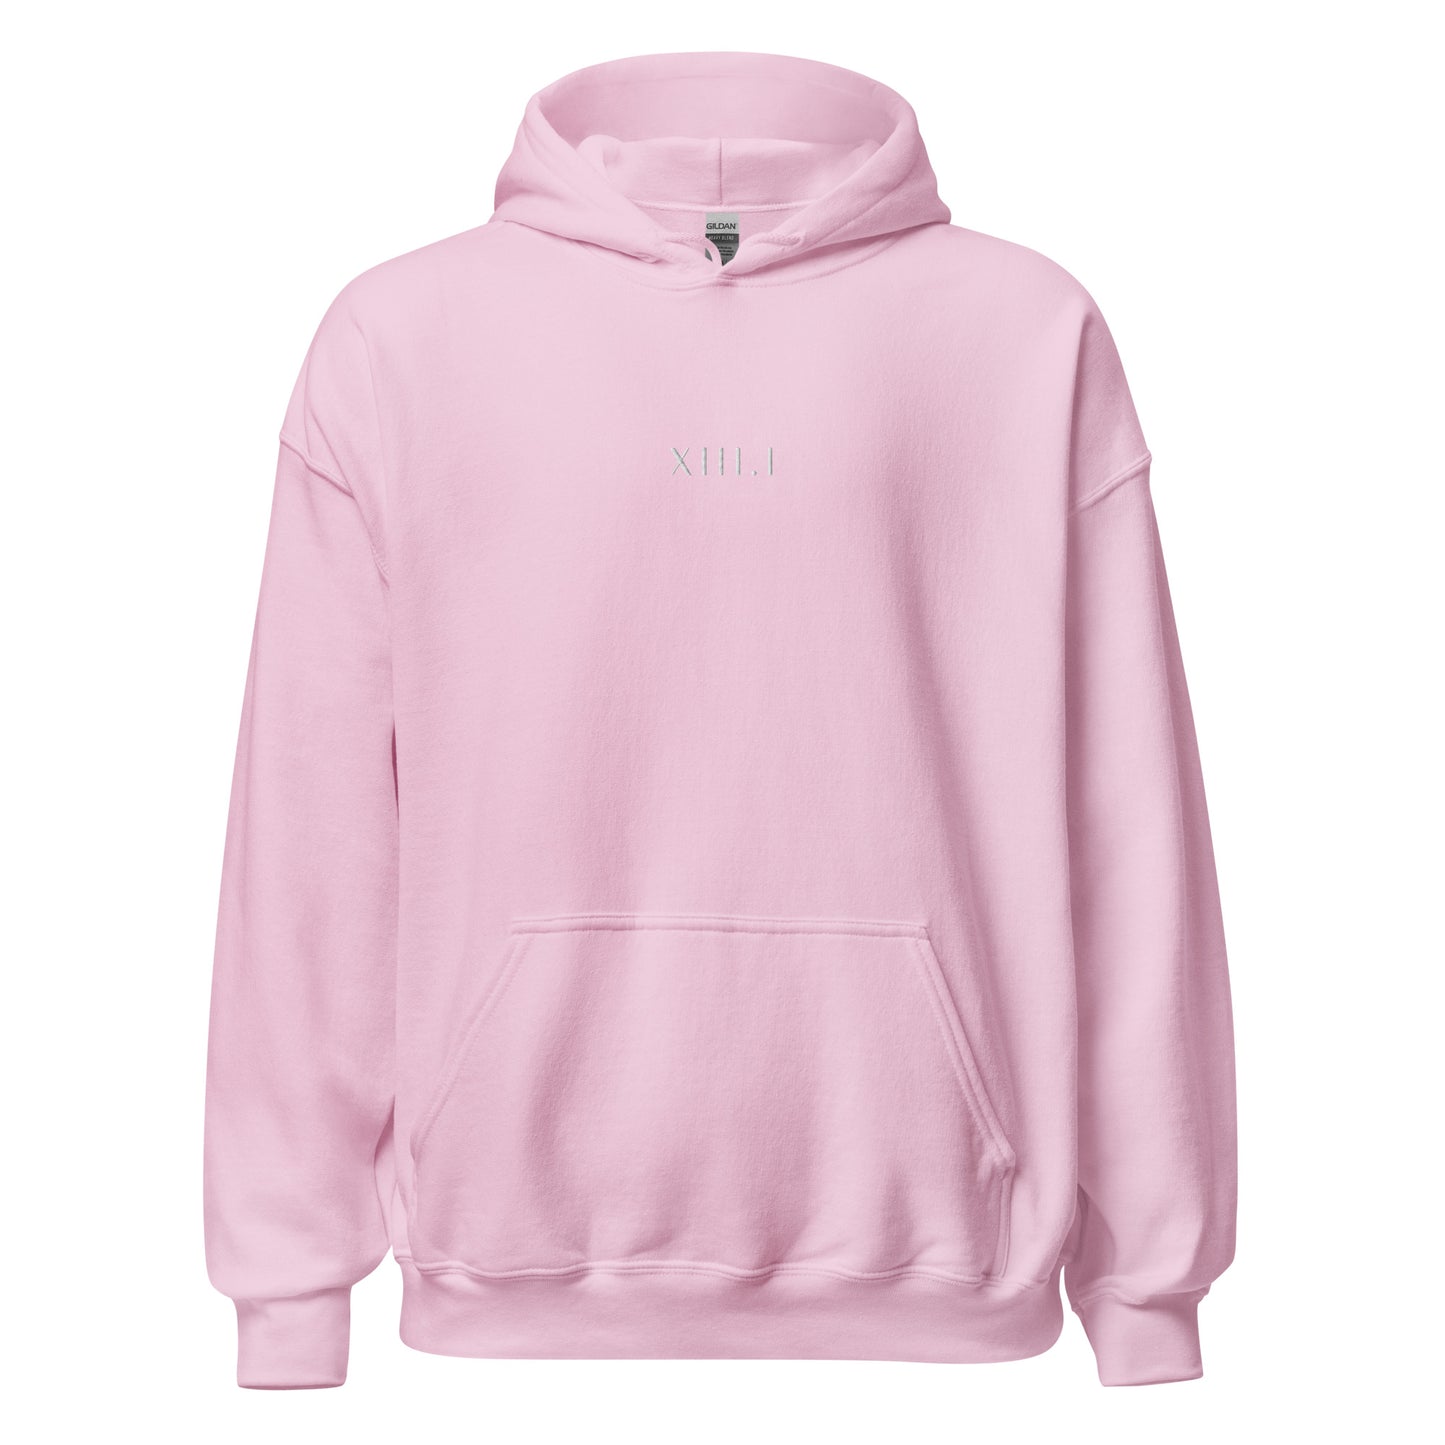 light pink unisex hoodie with XIII.I 13.1 half marathon in roman numerals embroidered in white writing